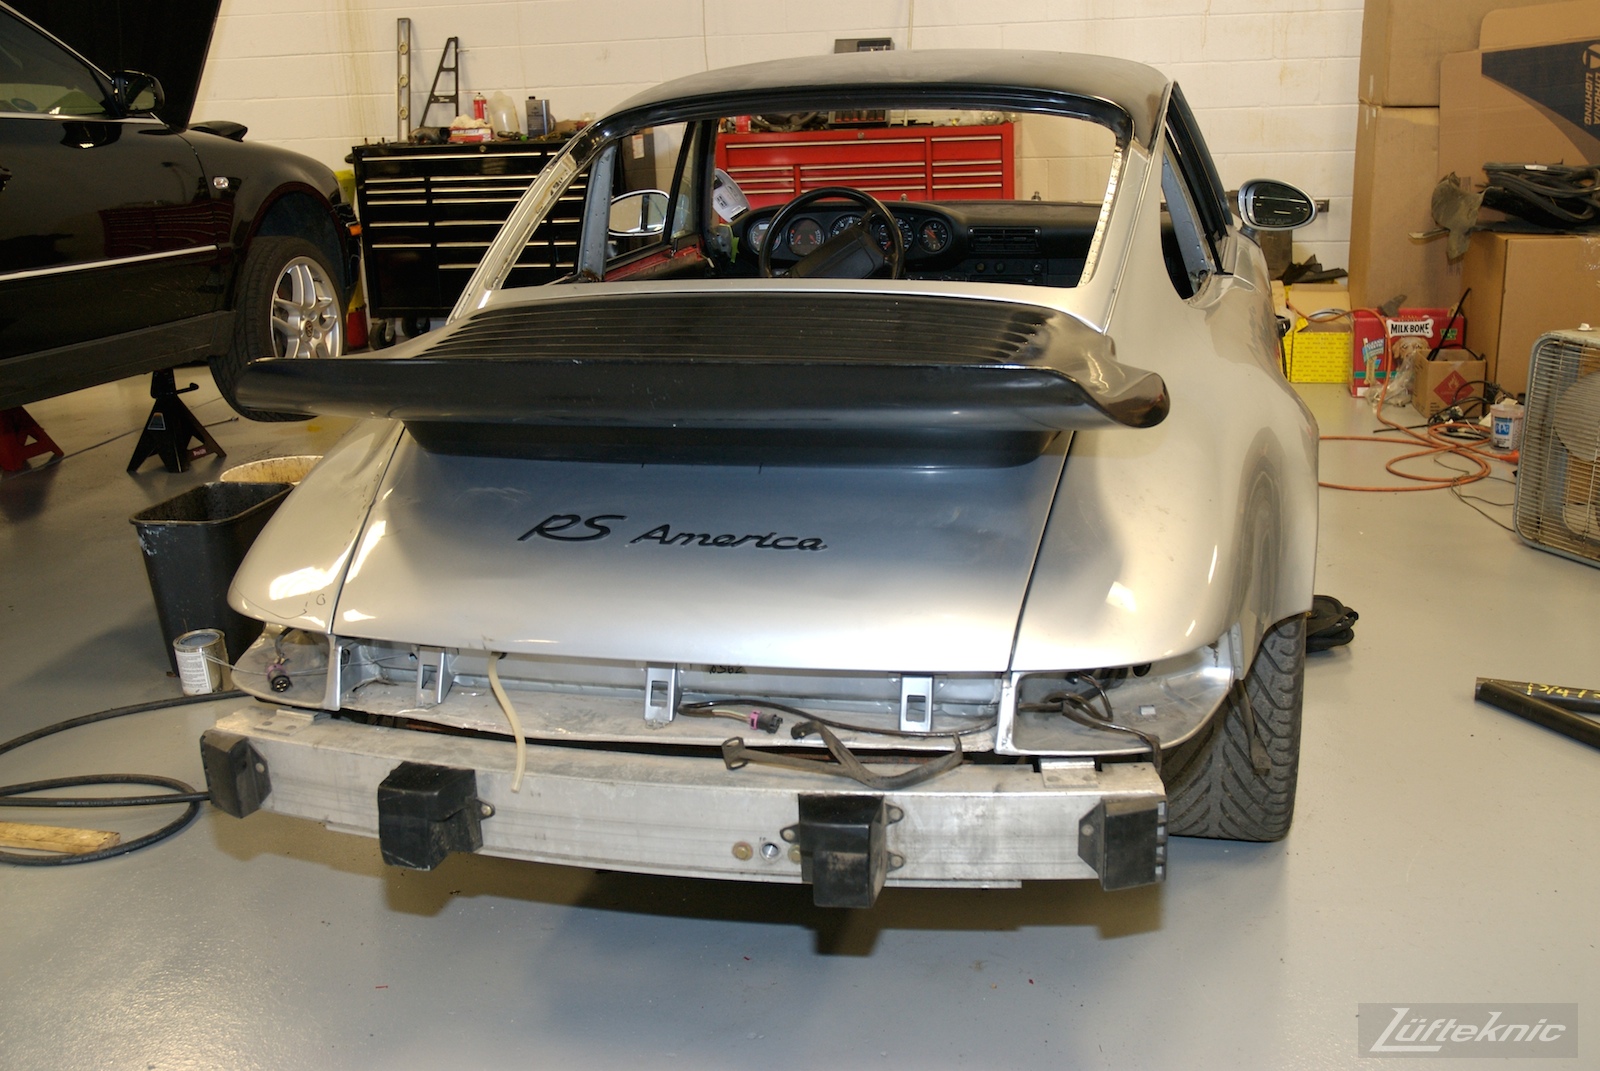 Panels fitted but still no glass on the 964 RS America project